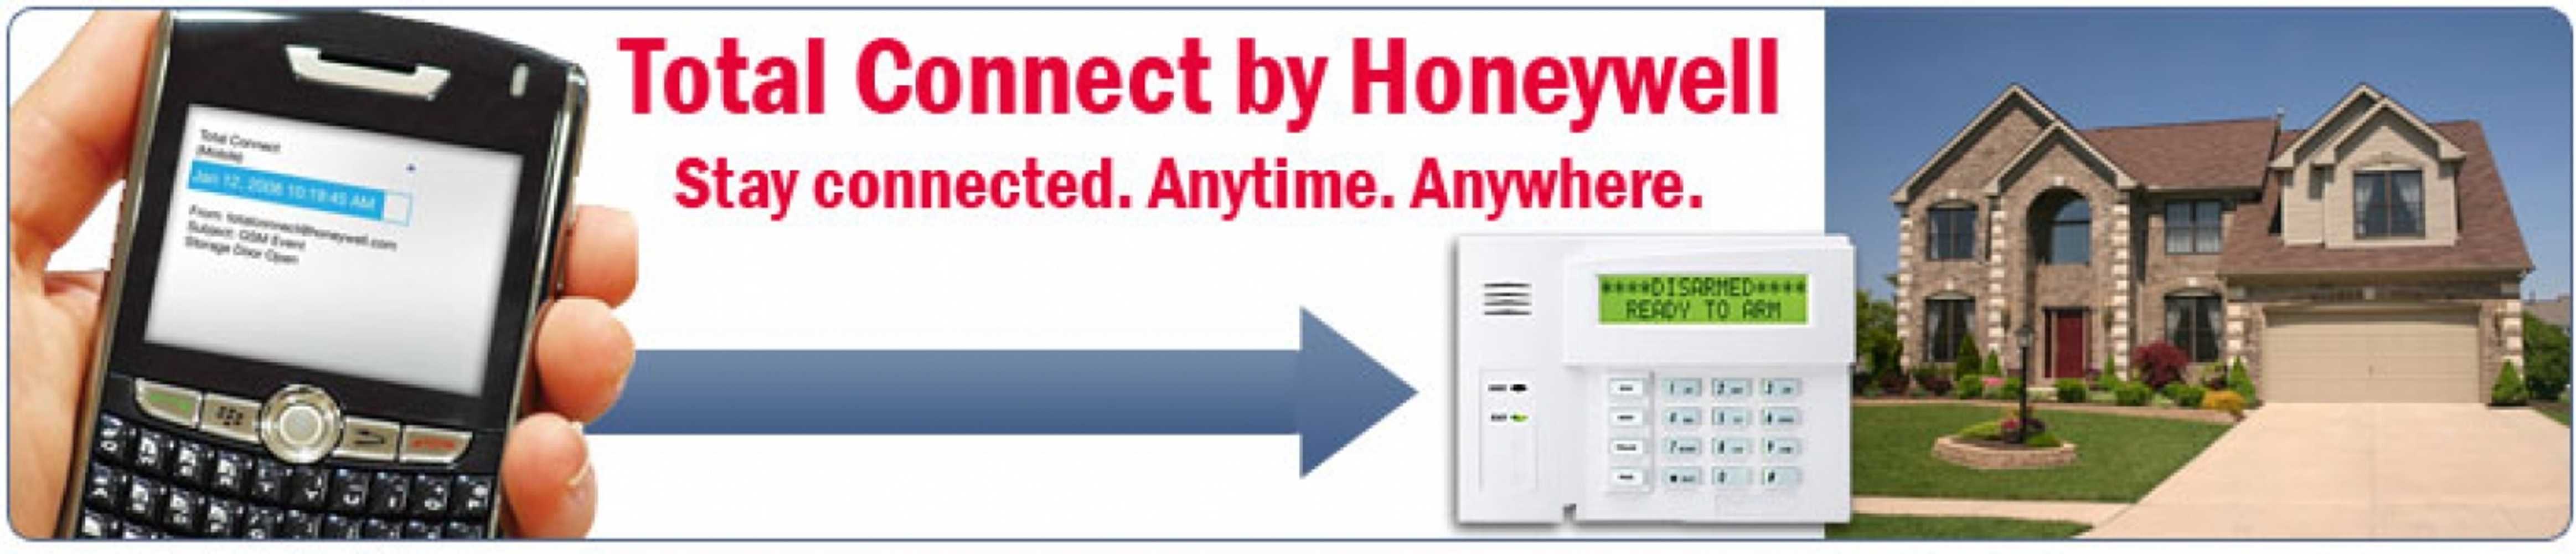 Honeywell total connect